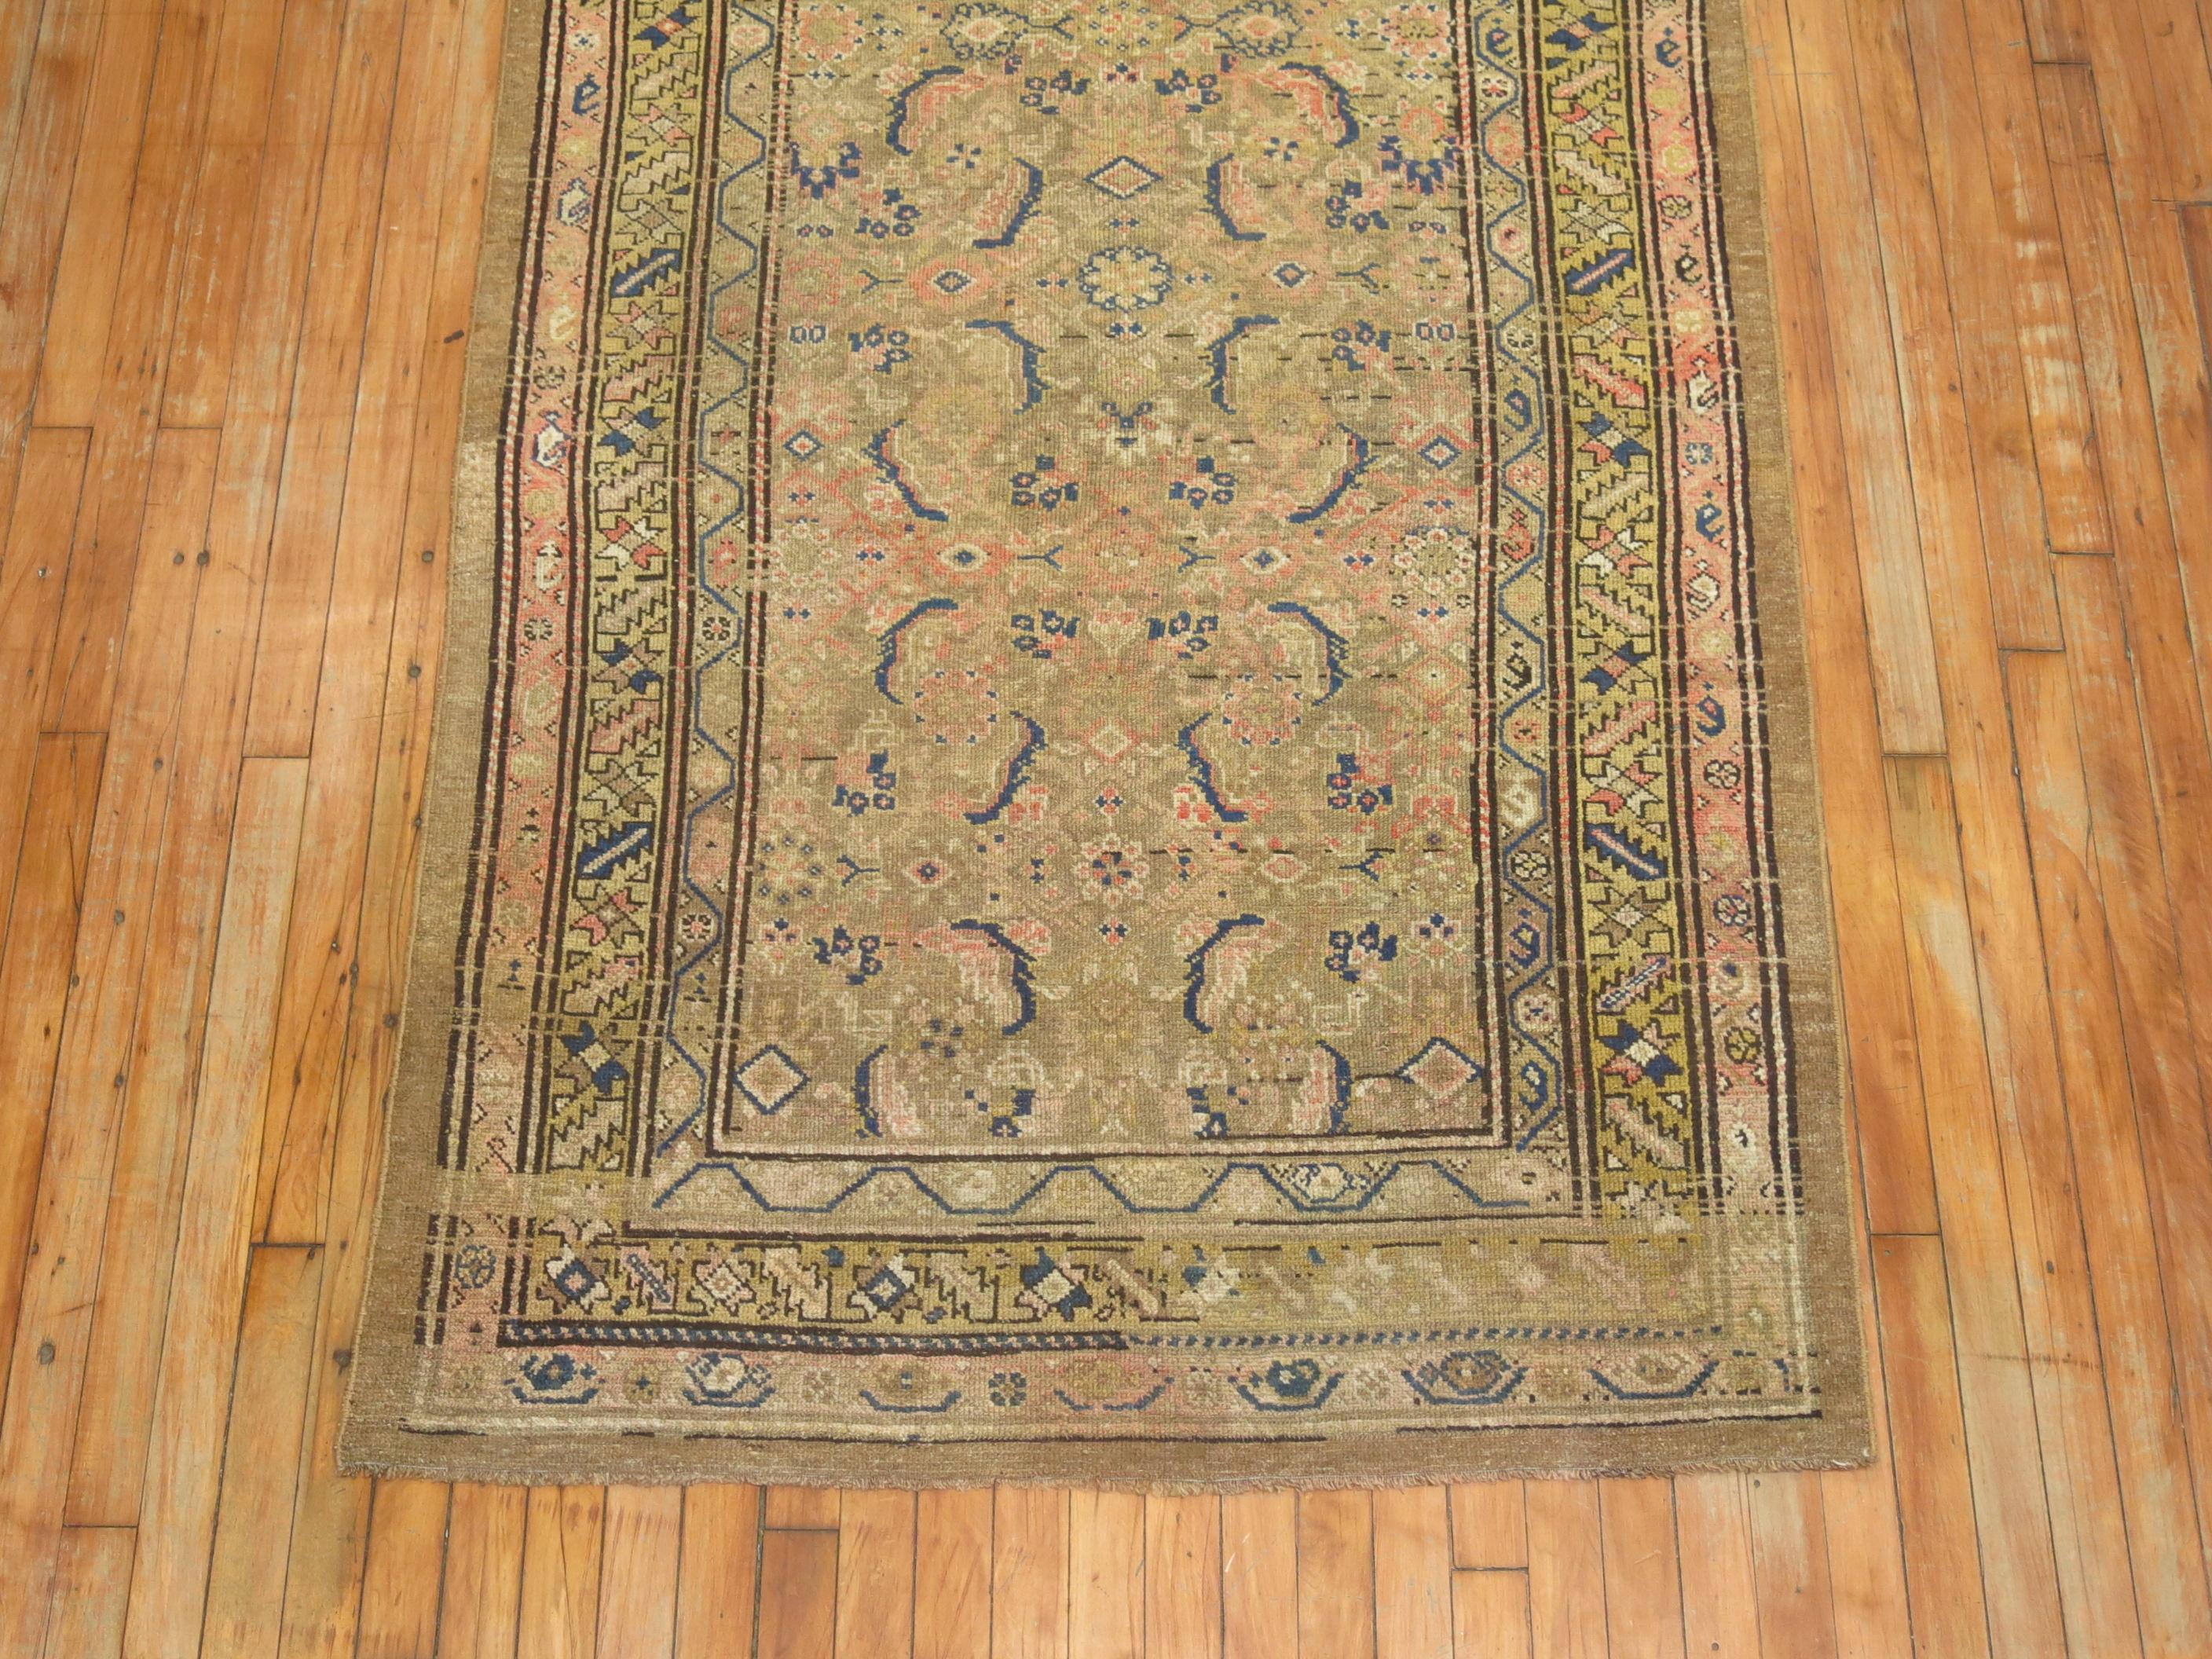 An antique Serab camel hair rug we just acquired.

The best antique rugs and carpets utilizing undyed camelhair are quite rare, as they represent a limited production of just a handful of the rug weaving villages and tribal encampments of the